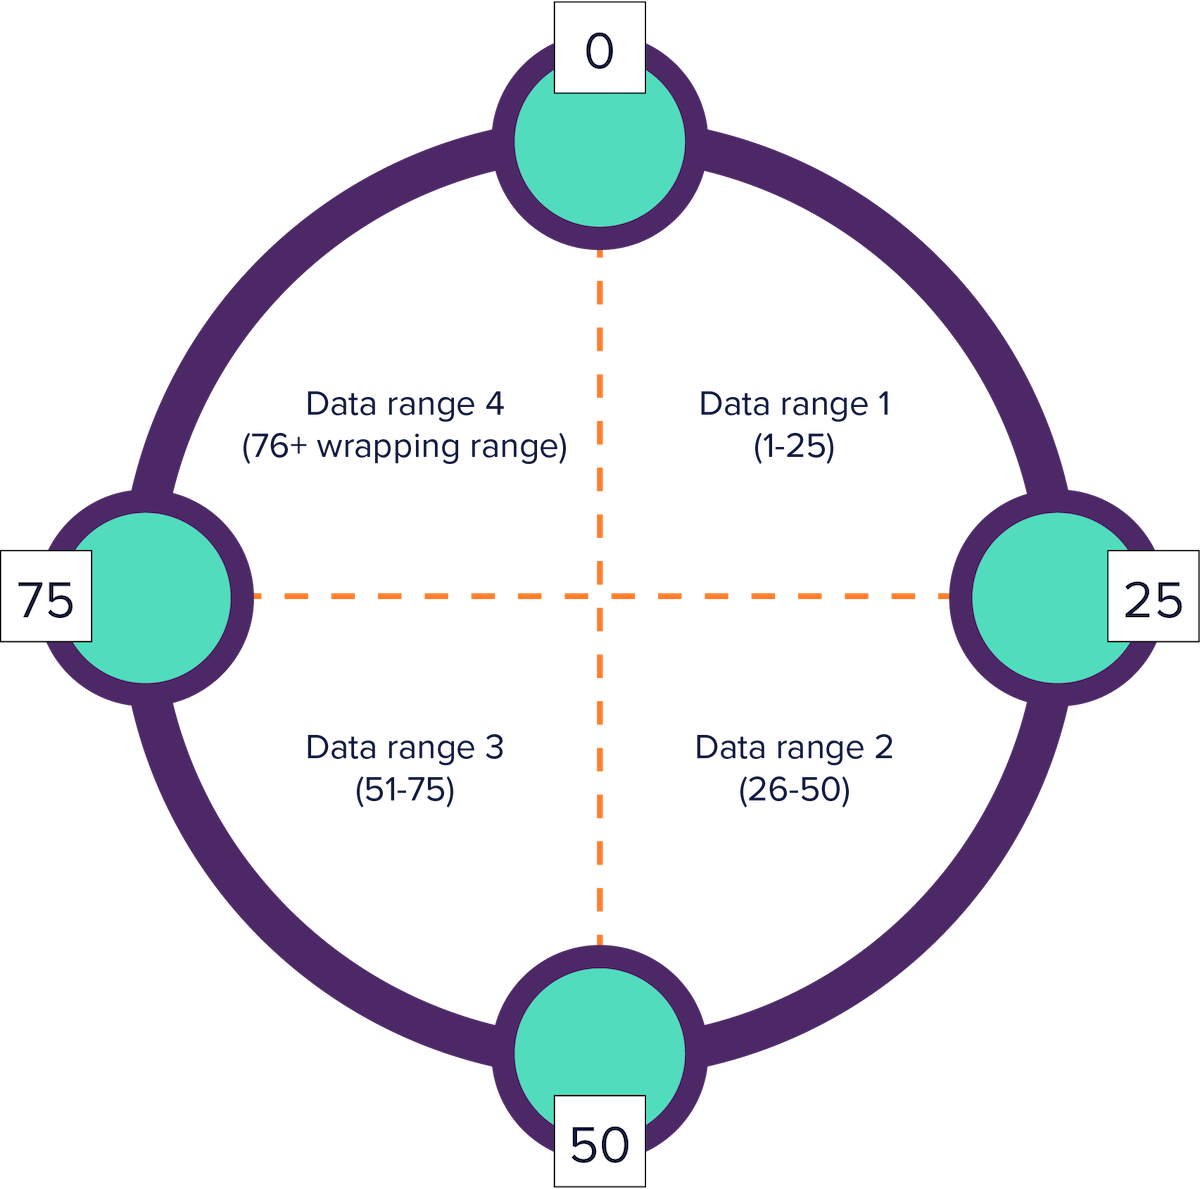 A large circle divided into four quadrants to represent a cluster with evenly distributed token ranges. Four smaller, evenly spaced circles represent nodes on the cluster.